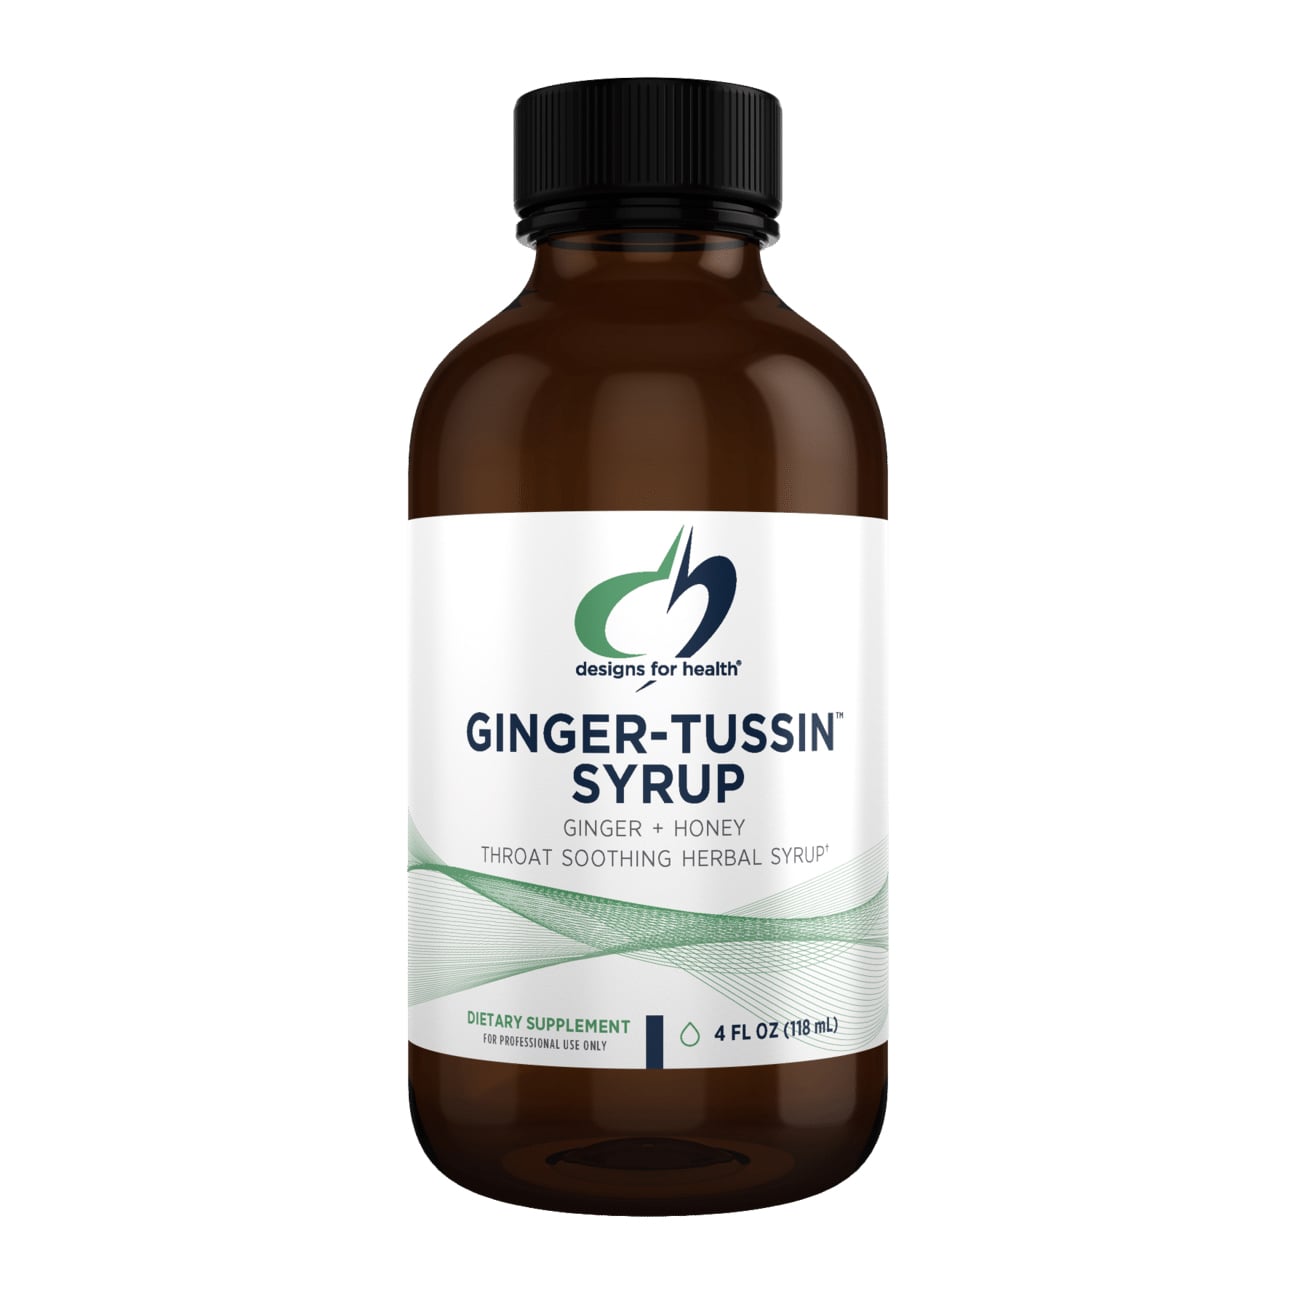 Ginger-Tussin Syrup 4 oz